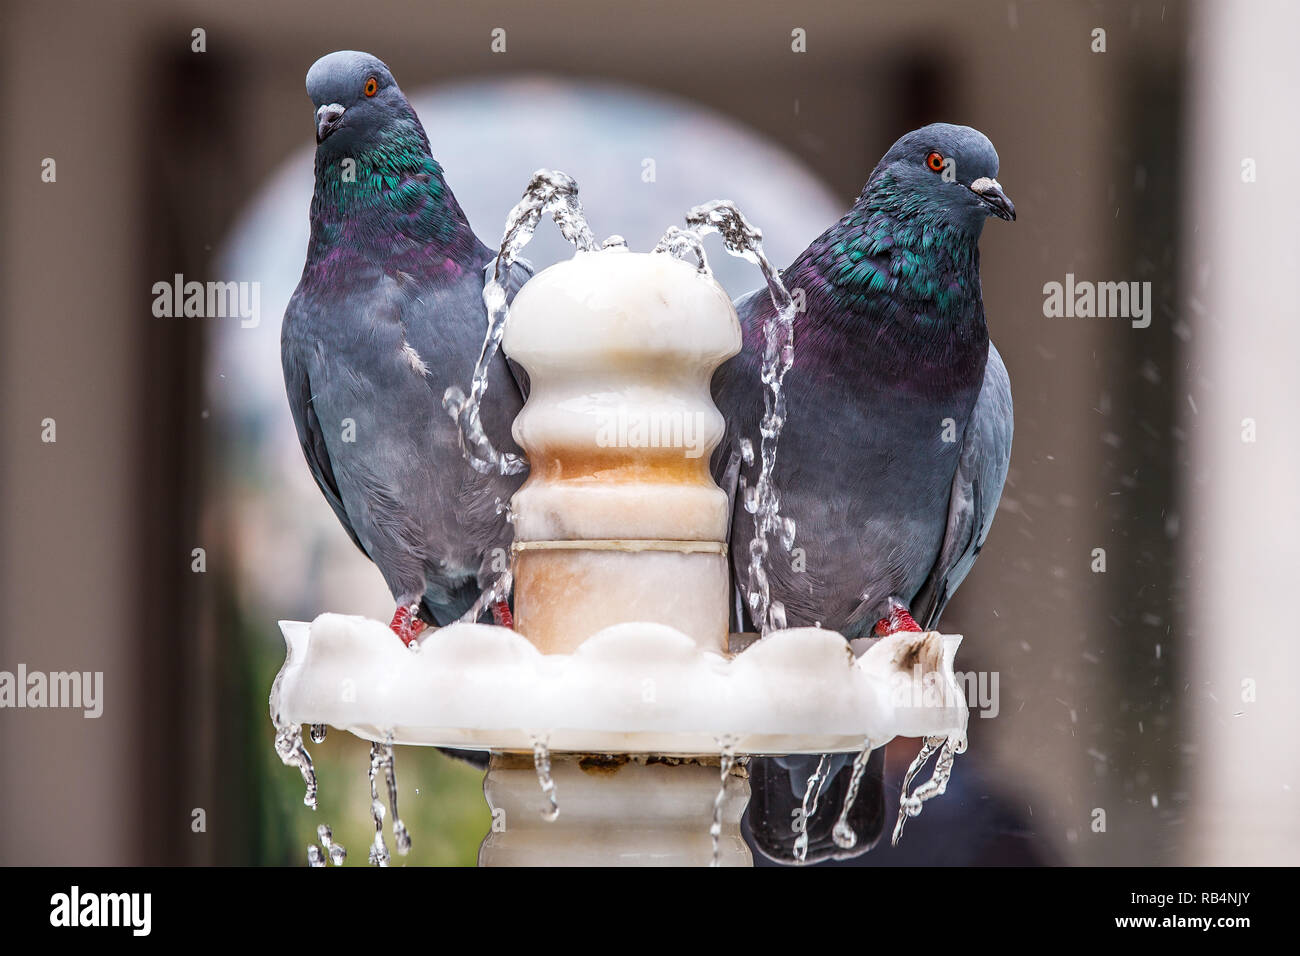 Two colorful pigeon, on fountain Stock Photo